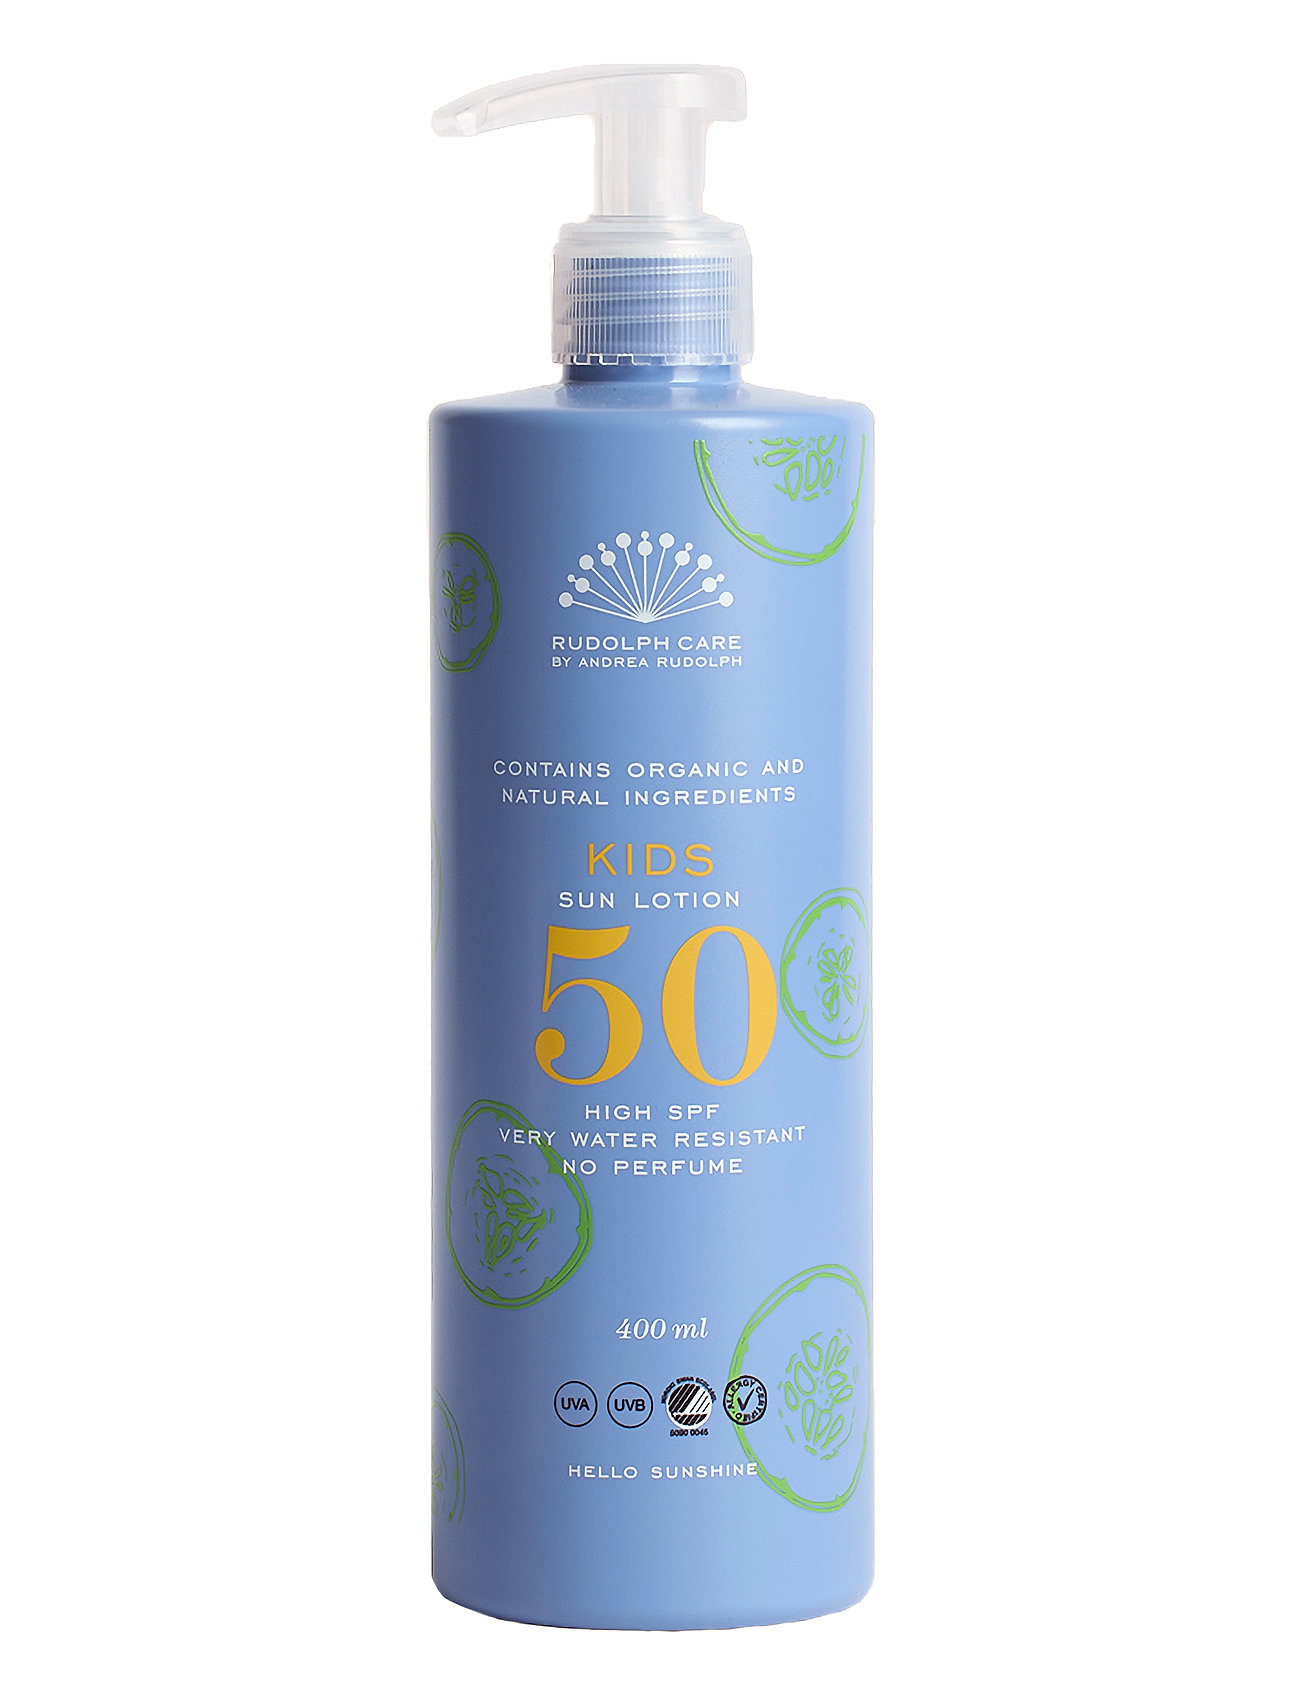 Kids Sun Lotion Spf 50 400 Ml Limited Edition Beauty Women Skin Care Sun Products Sunscreen For Kids Nude Rudolph Care